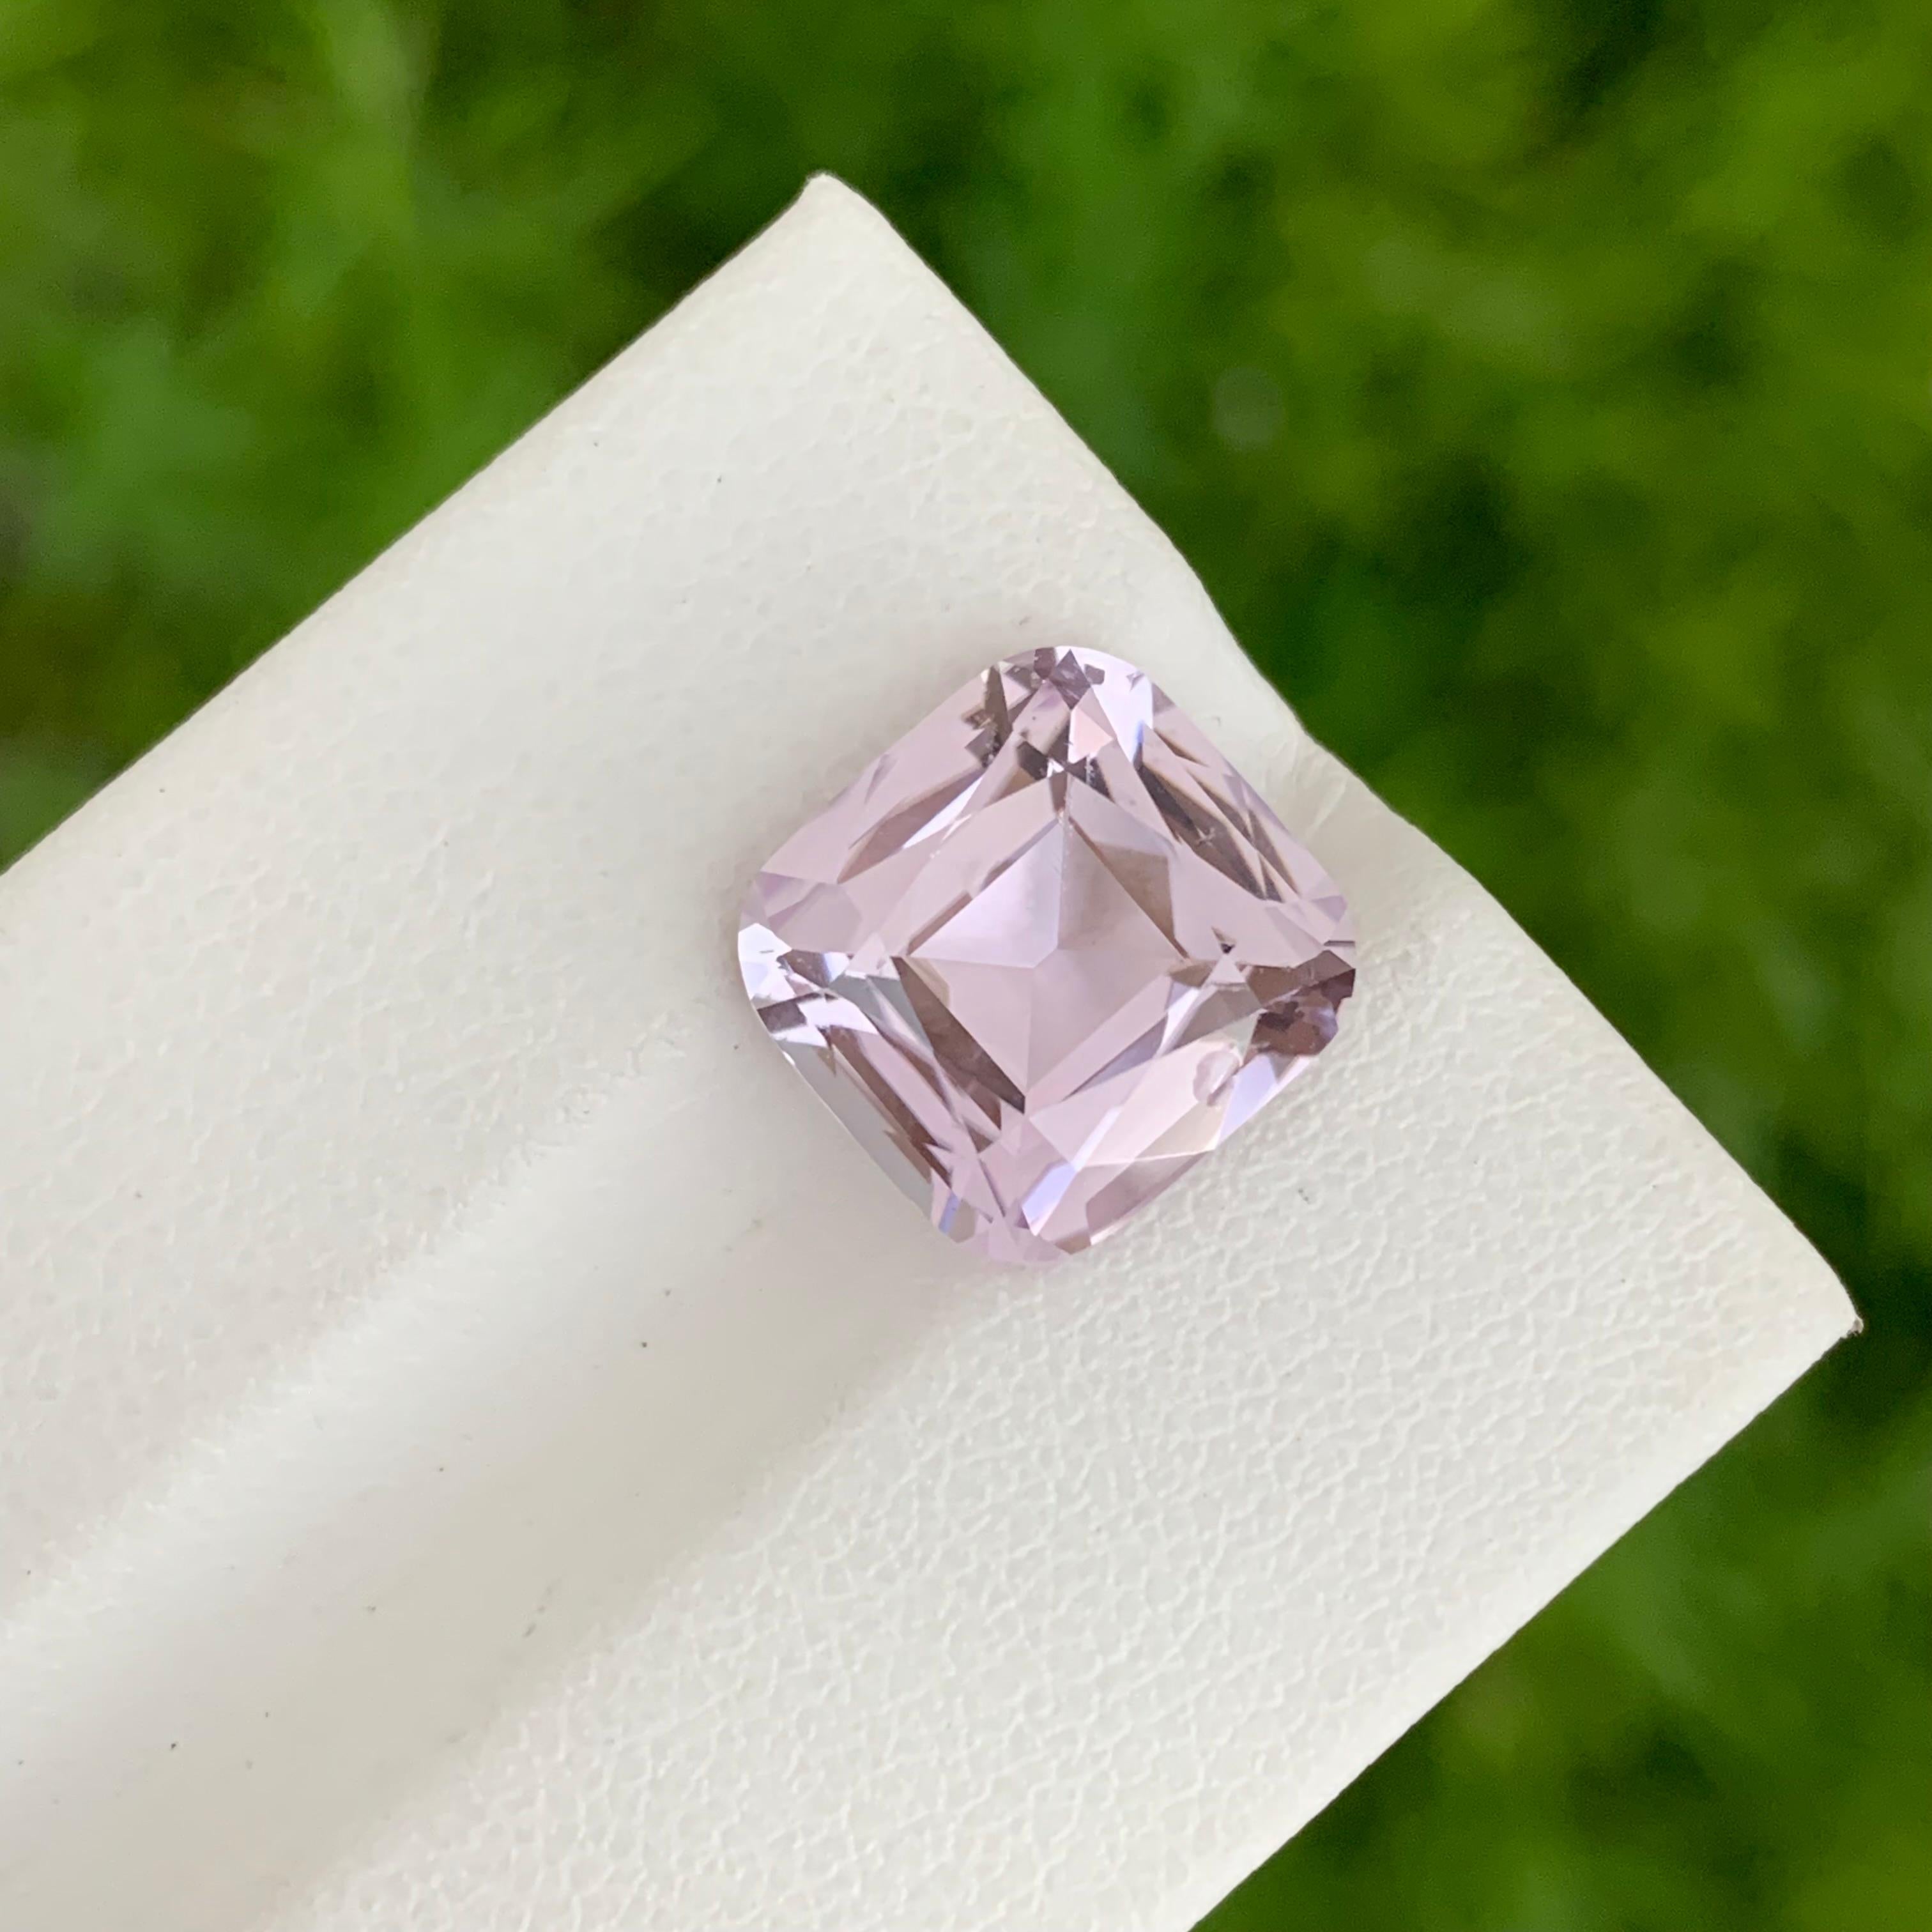 Loose Kunzite
Weight: 6.20 Carats
Dimension: 11.4 x 11 x 6.8 Mm
Colour: Pale Pink
Origin: Kunar, Afghanistan
Quality: Clean
Treatment: Non
Certficate: On Demand

Kunzite, a delicate and enchanting gemstone, is cherished for its exquisite pink to